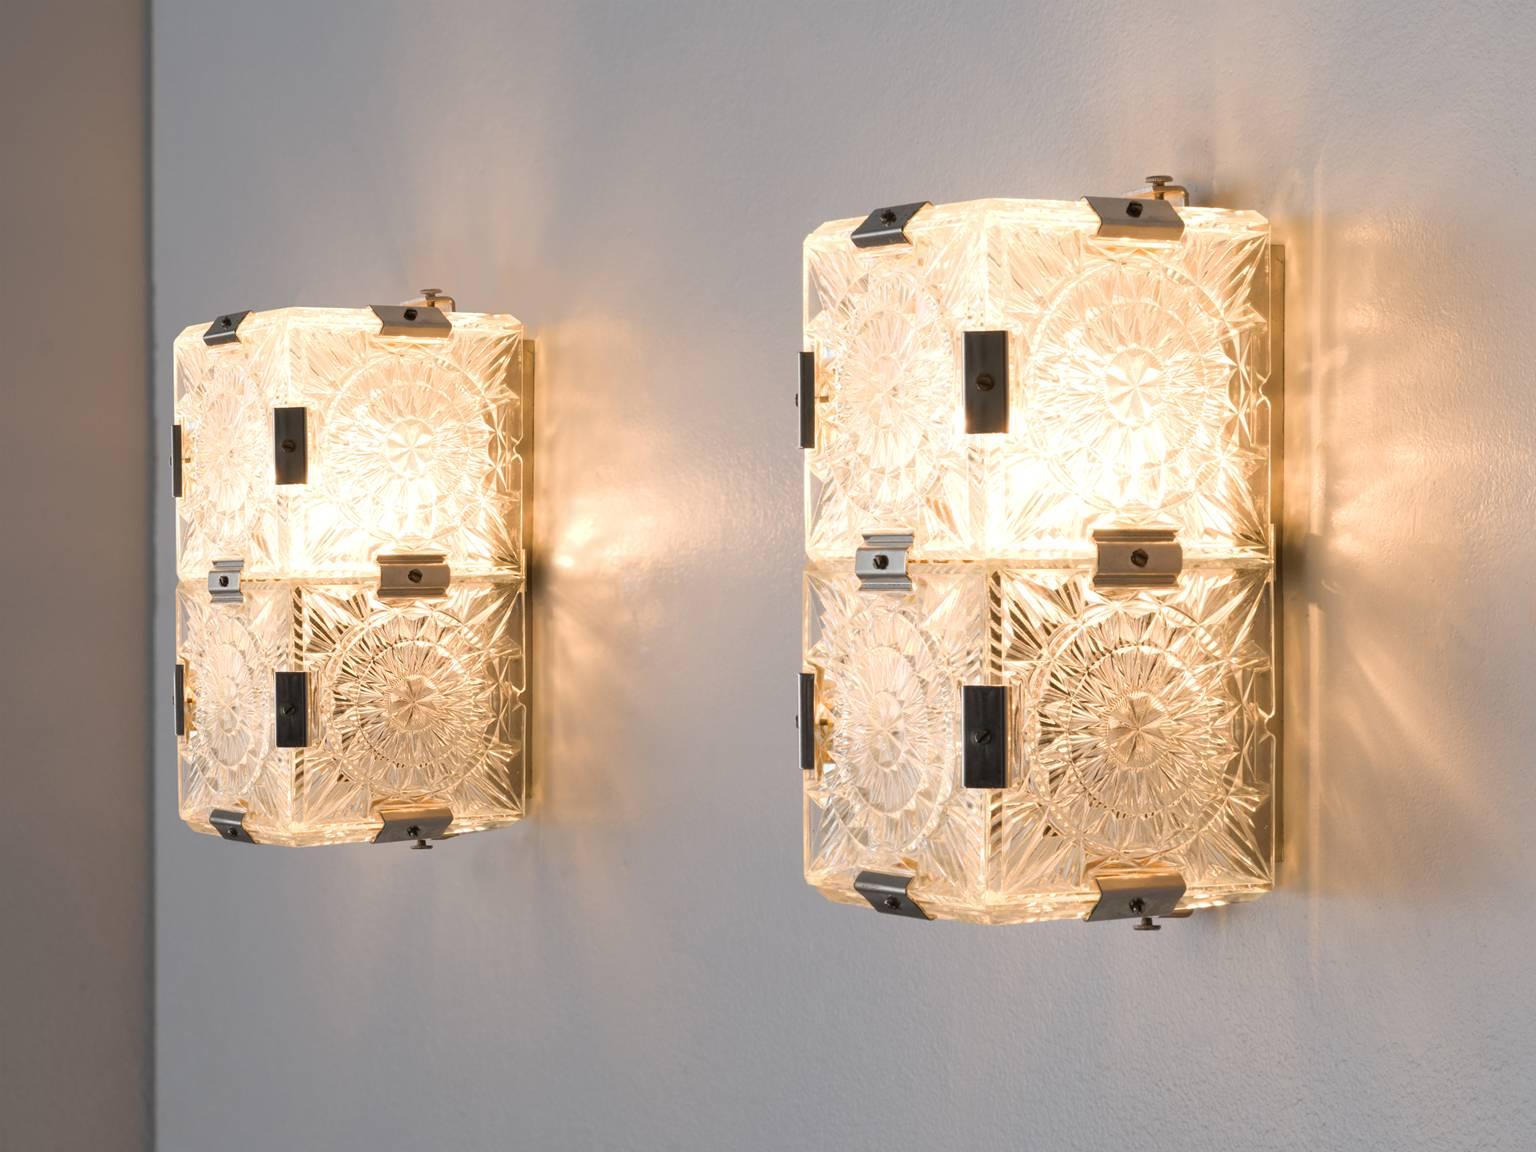 Wall lights, brass and structured glass, Europe, 1930s.

These geometric sturdy wall lights give off a warm light partition thanks to their thick, high-quality glass. The lights feature a double, symmetrical lay-out with abstract patterns. Although